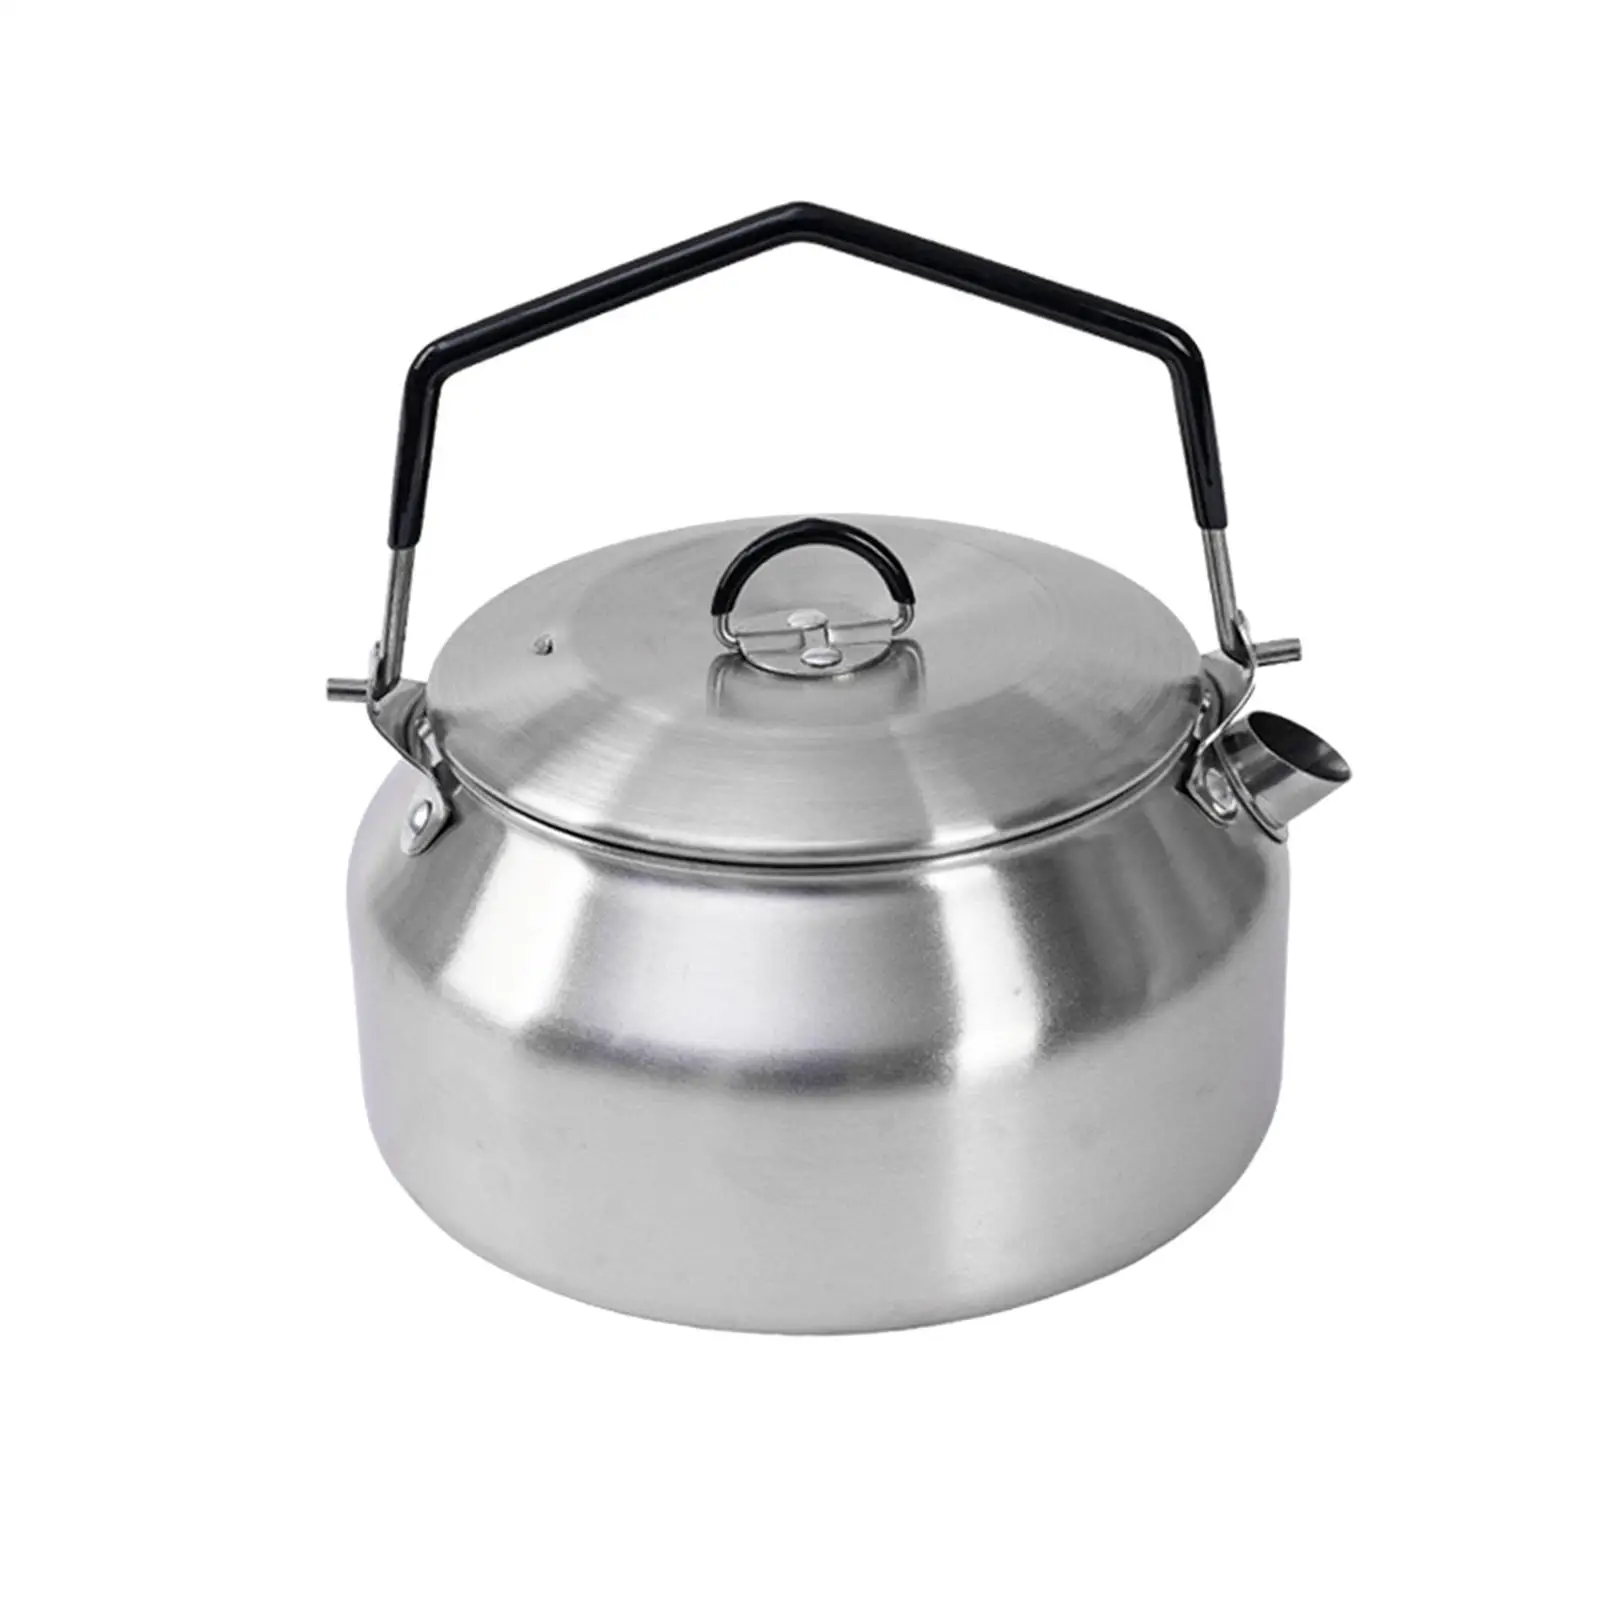 Camping Water Kettle Teapot Portable Cooking Anti Scald Handle Water Boiler for Mountaineering Fishing Campfire Travel Barbecue